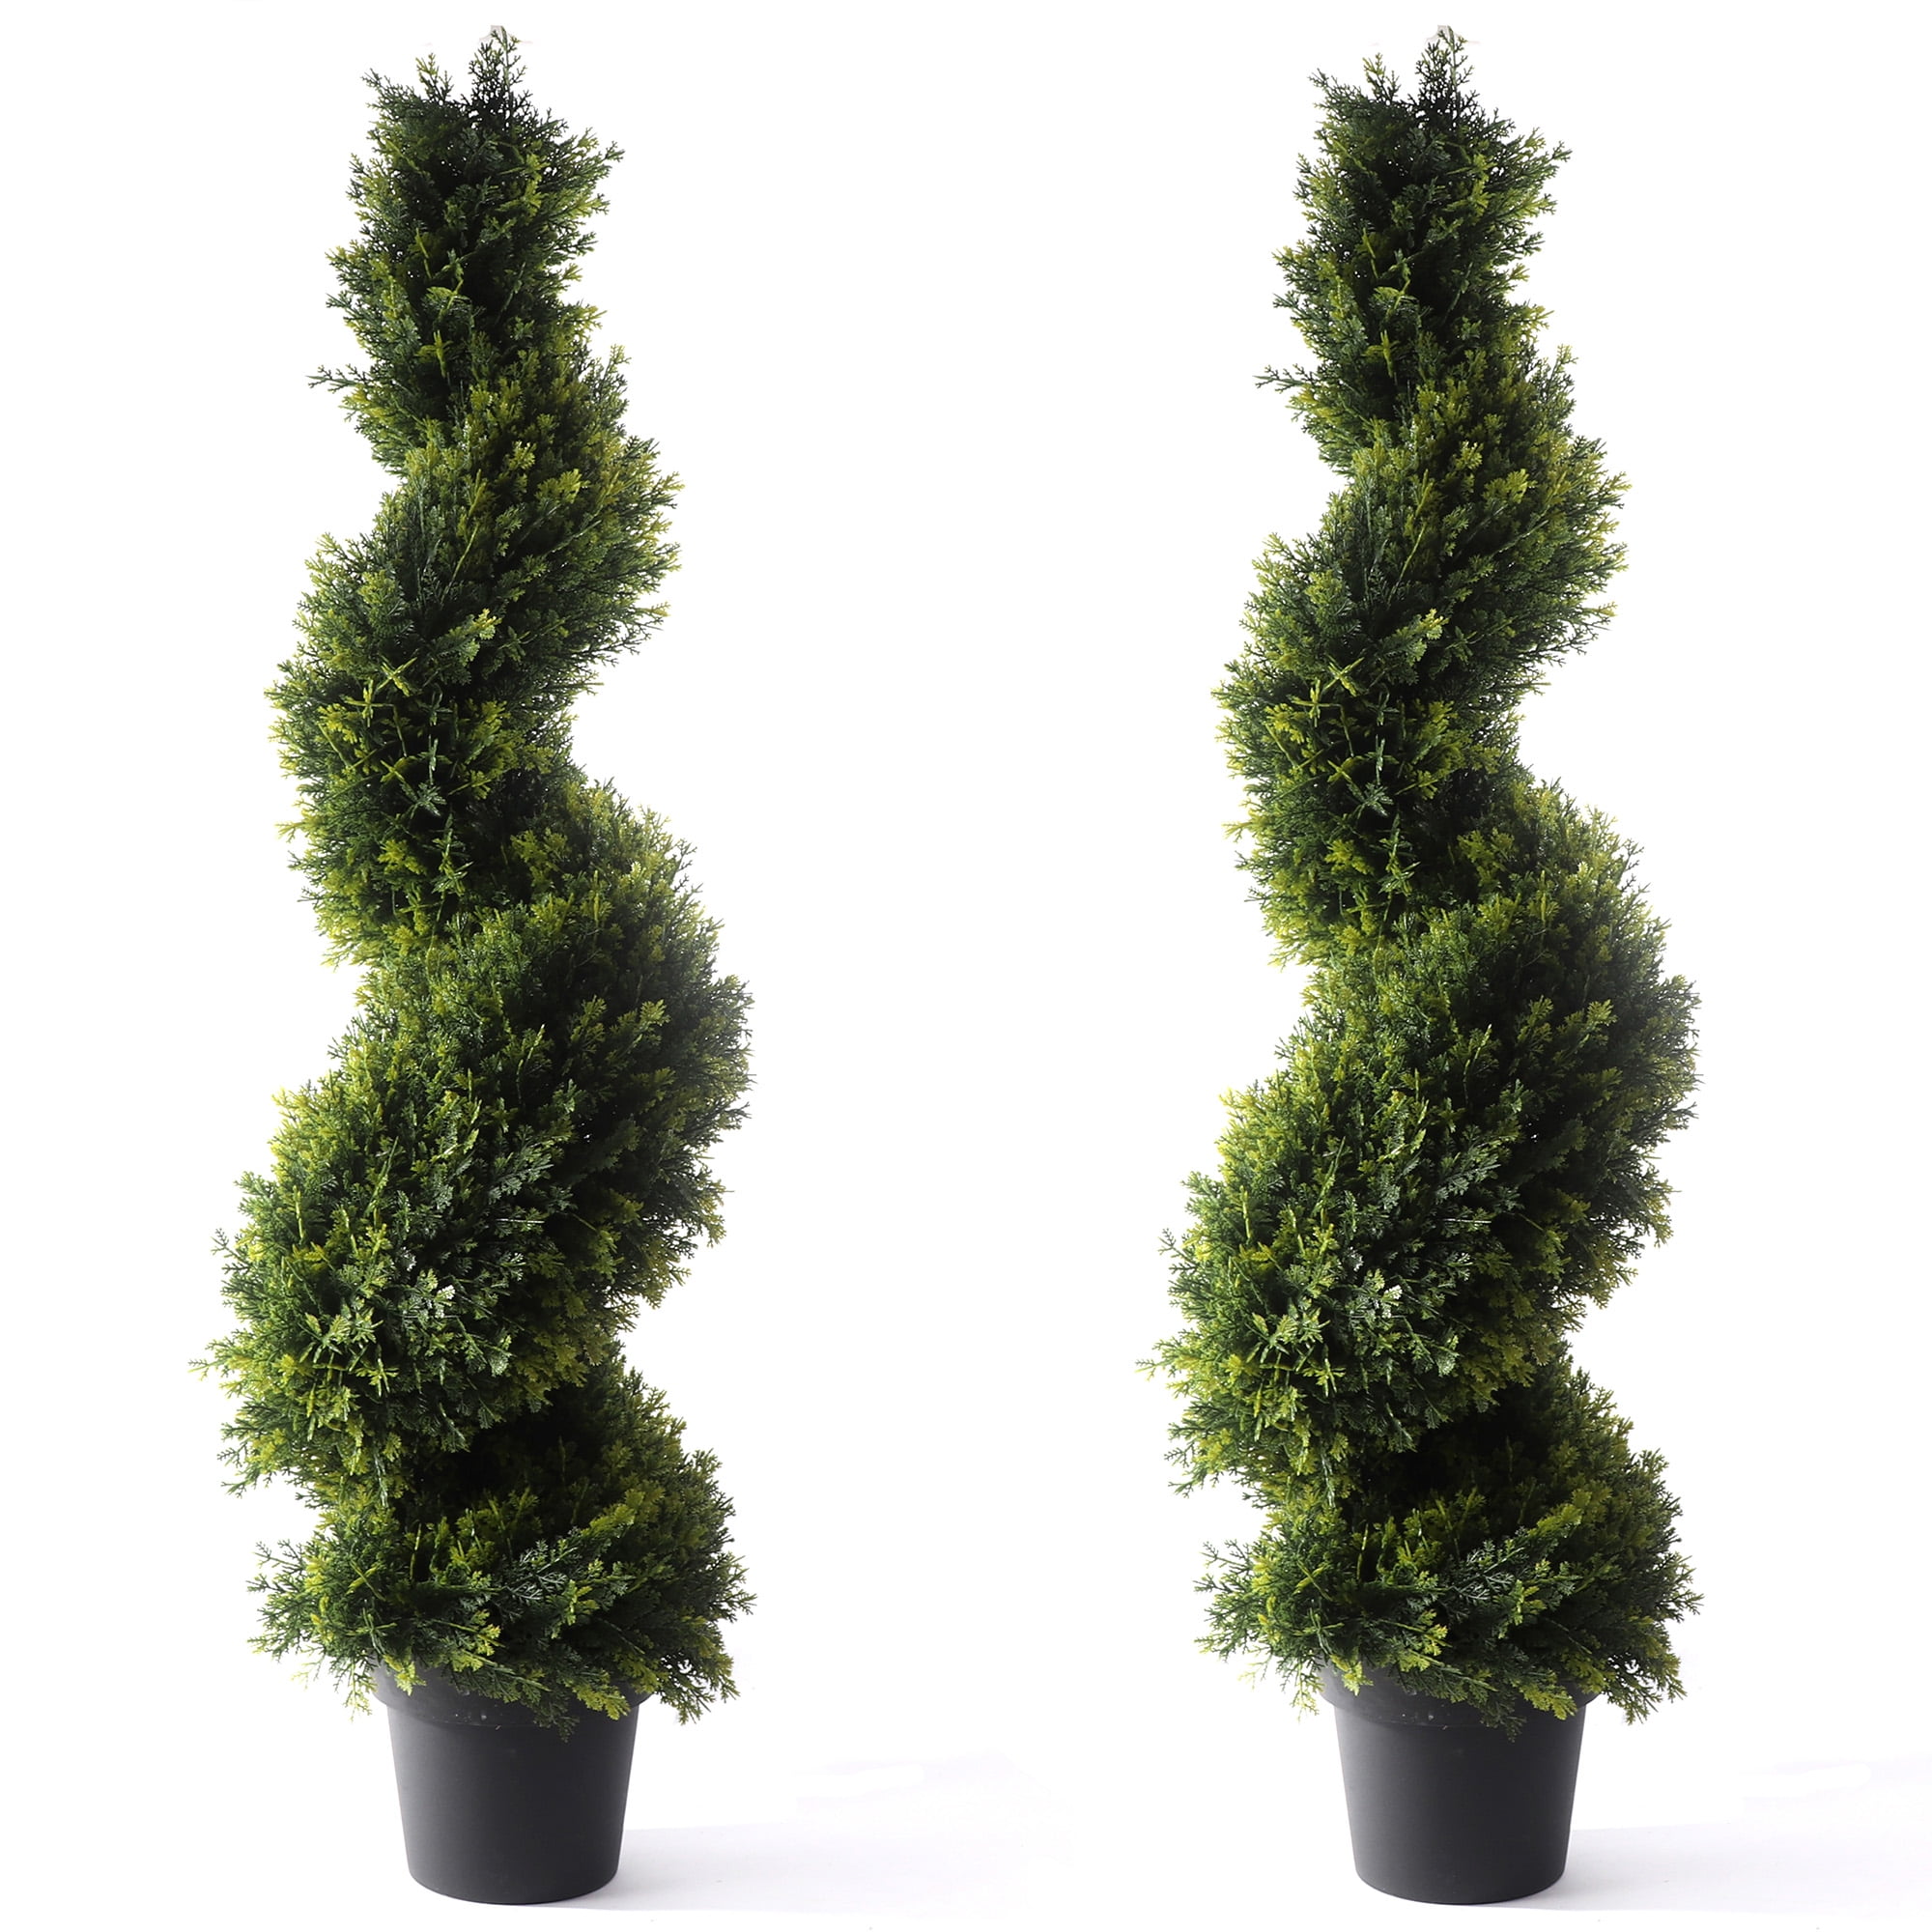 Pair of Extra Large SPIRAL TREE Boxwood Artificial Realistic Tree Indoor Outdoor 